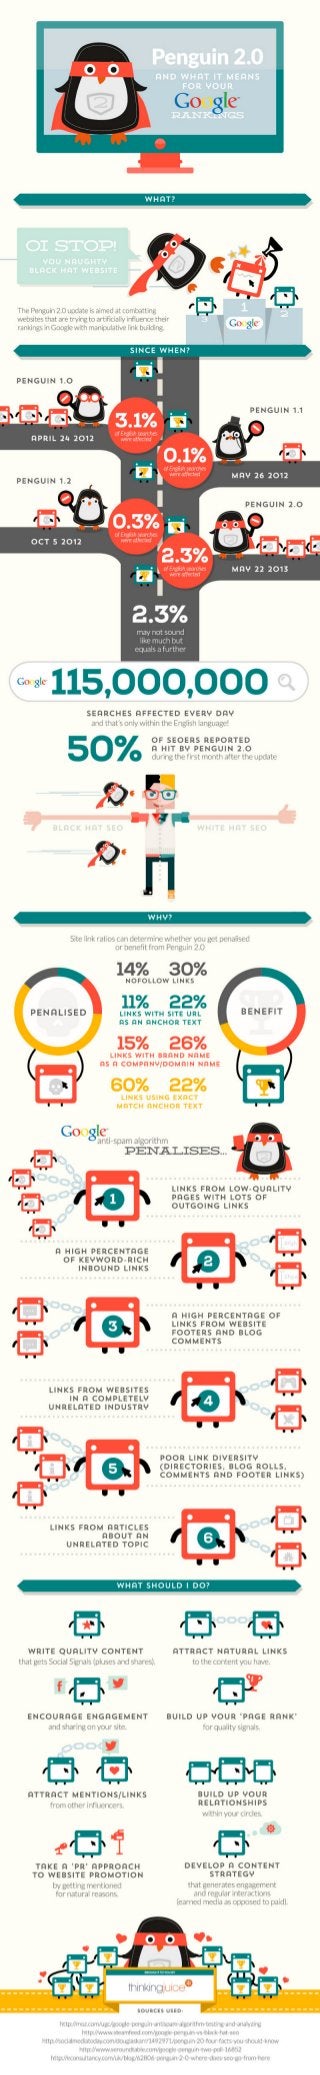 The Penguin 2.0 and What It Means For Your Google Ranking